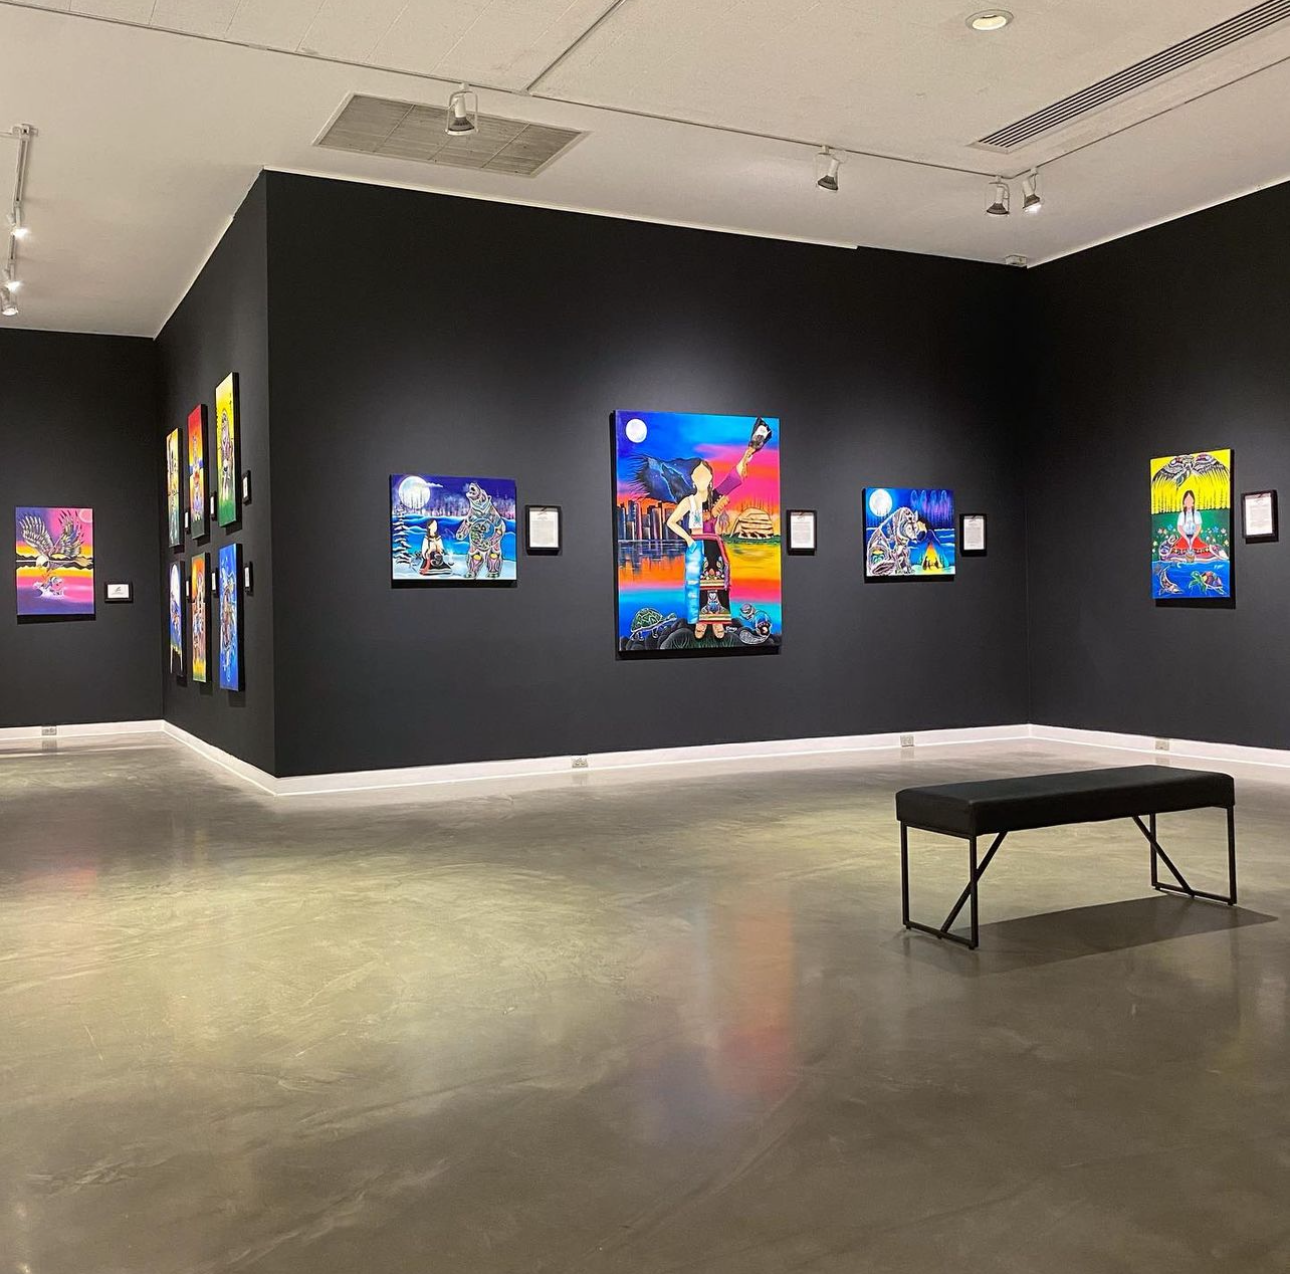  WKP Gallery; a large, open gallery space with black walls and potlights highlighting the brightly coloured indigenous art hung along the walls. 